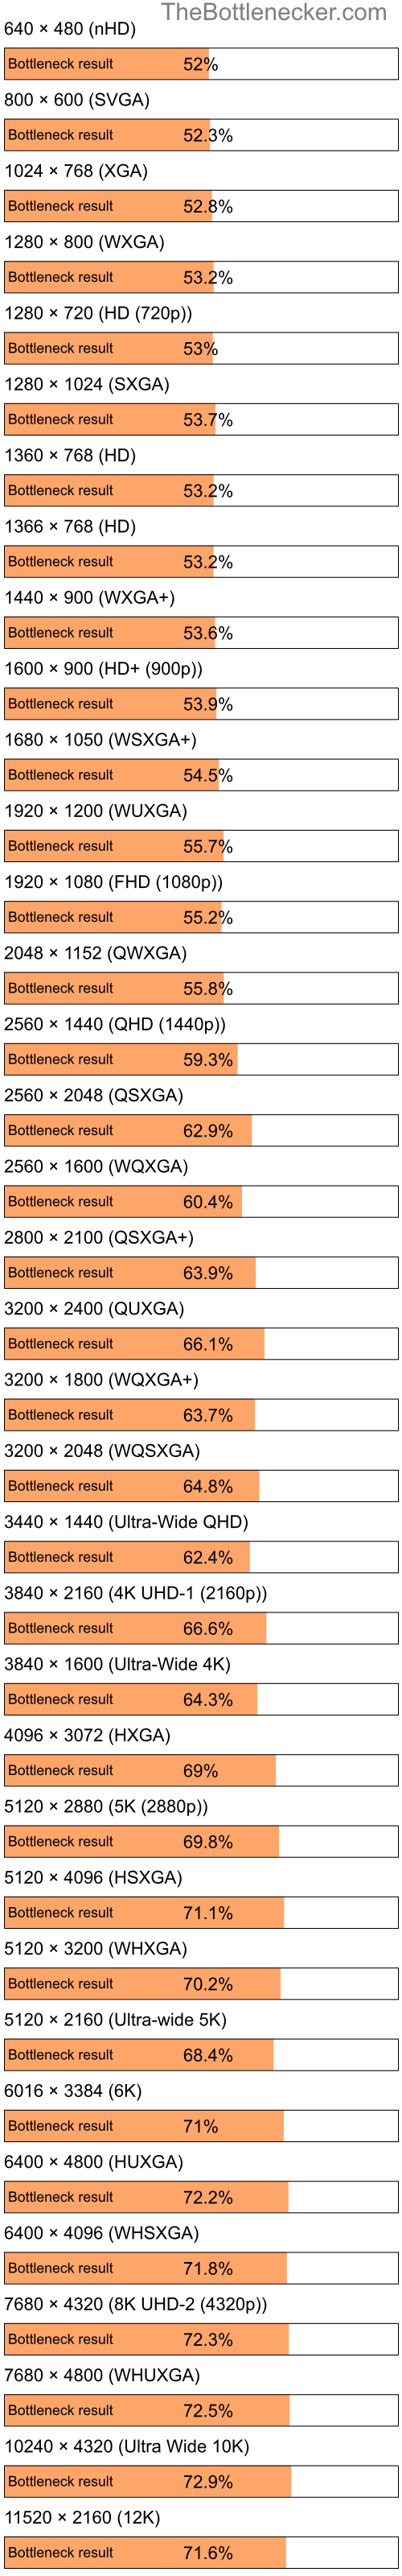 Bottleneck results by resolution for Intel Pentium 4 and AMD Radeon HD 4200 in Processor Intense Tasks